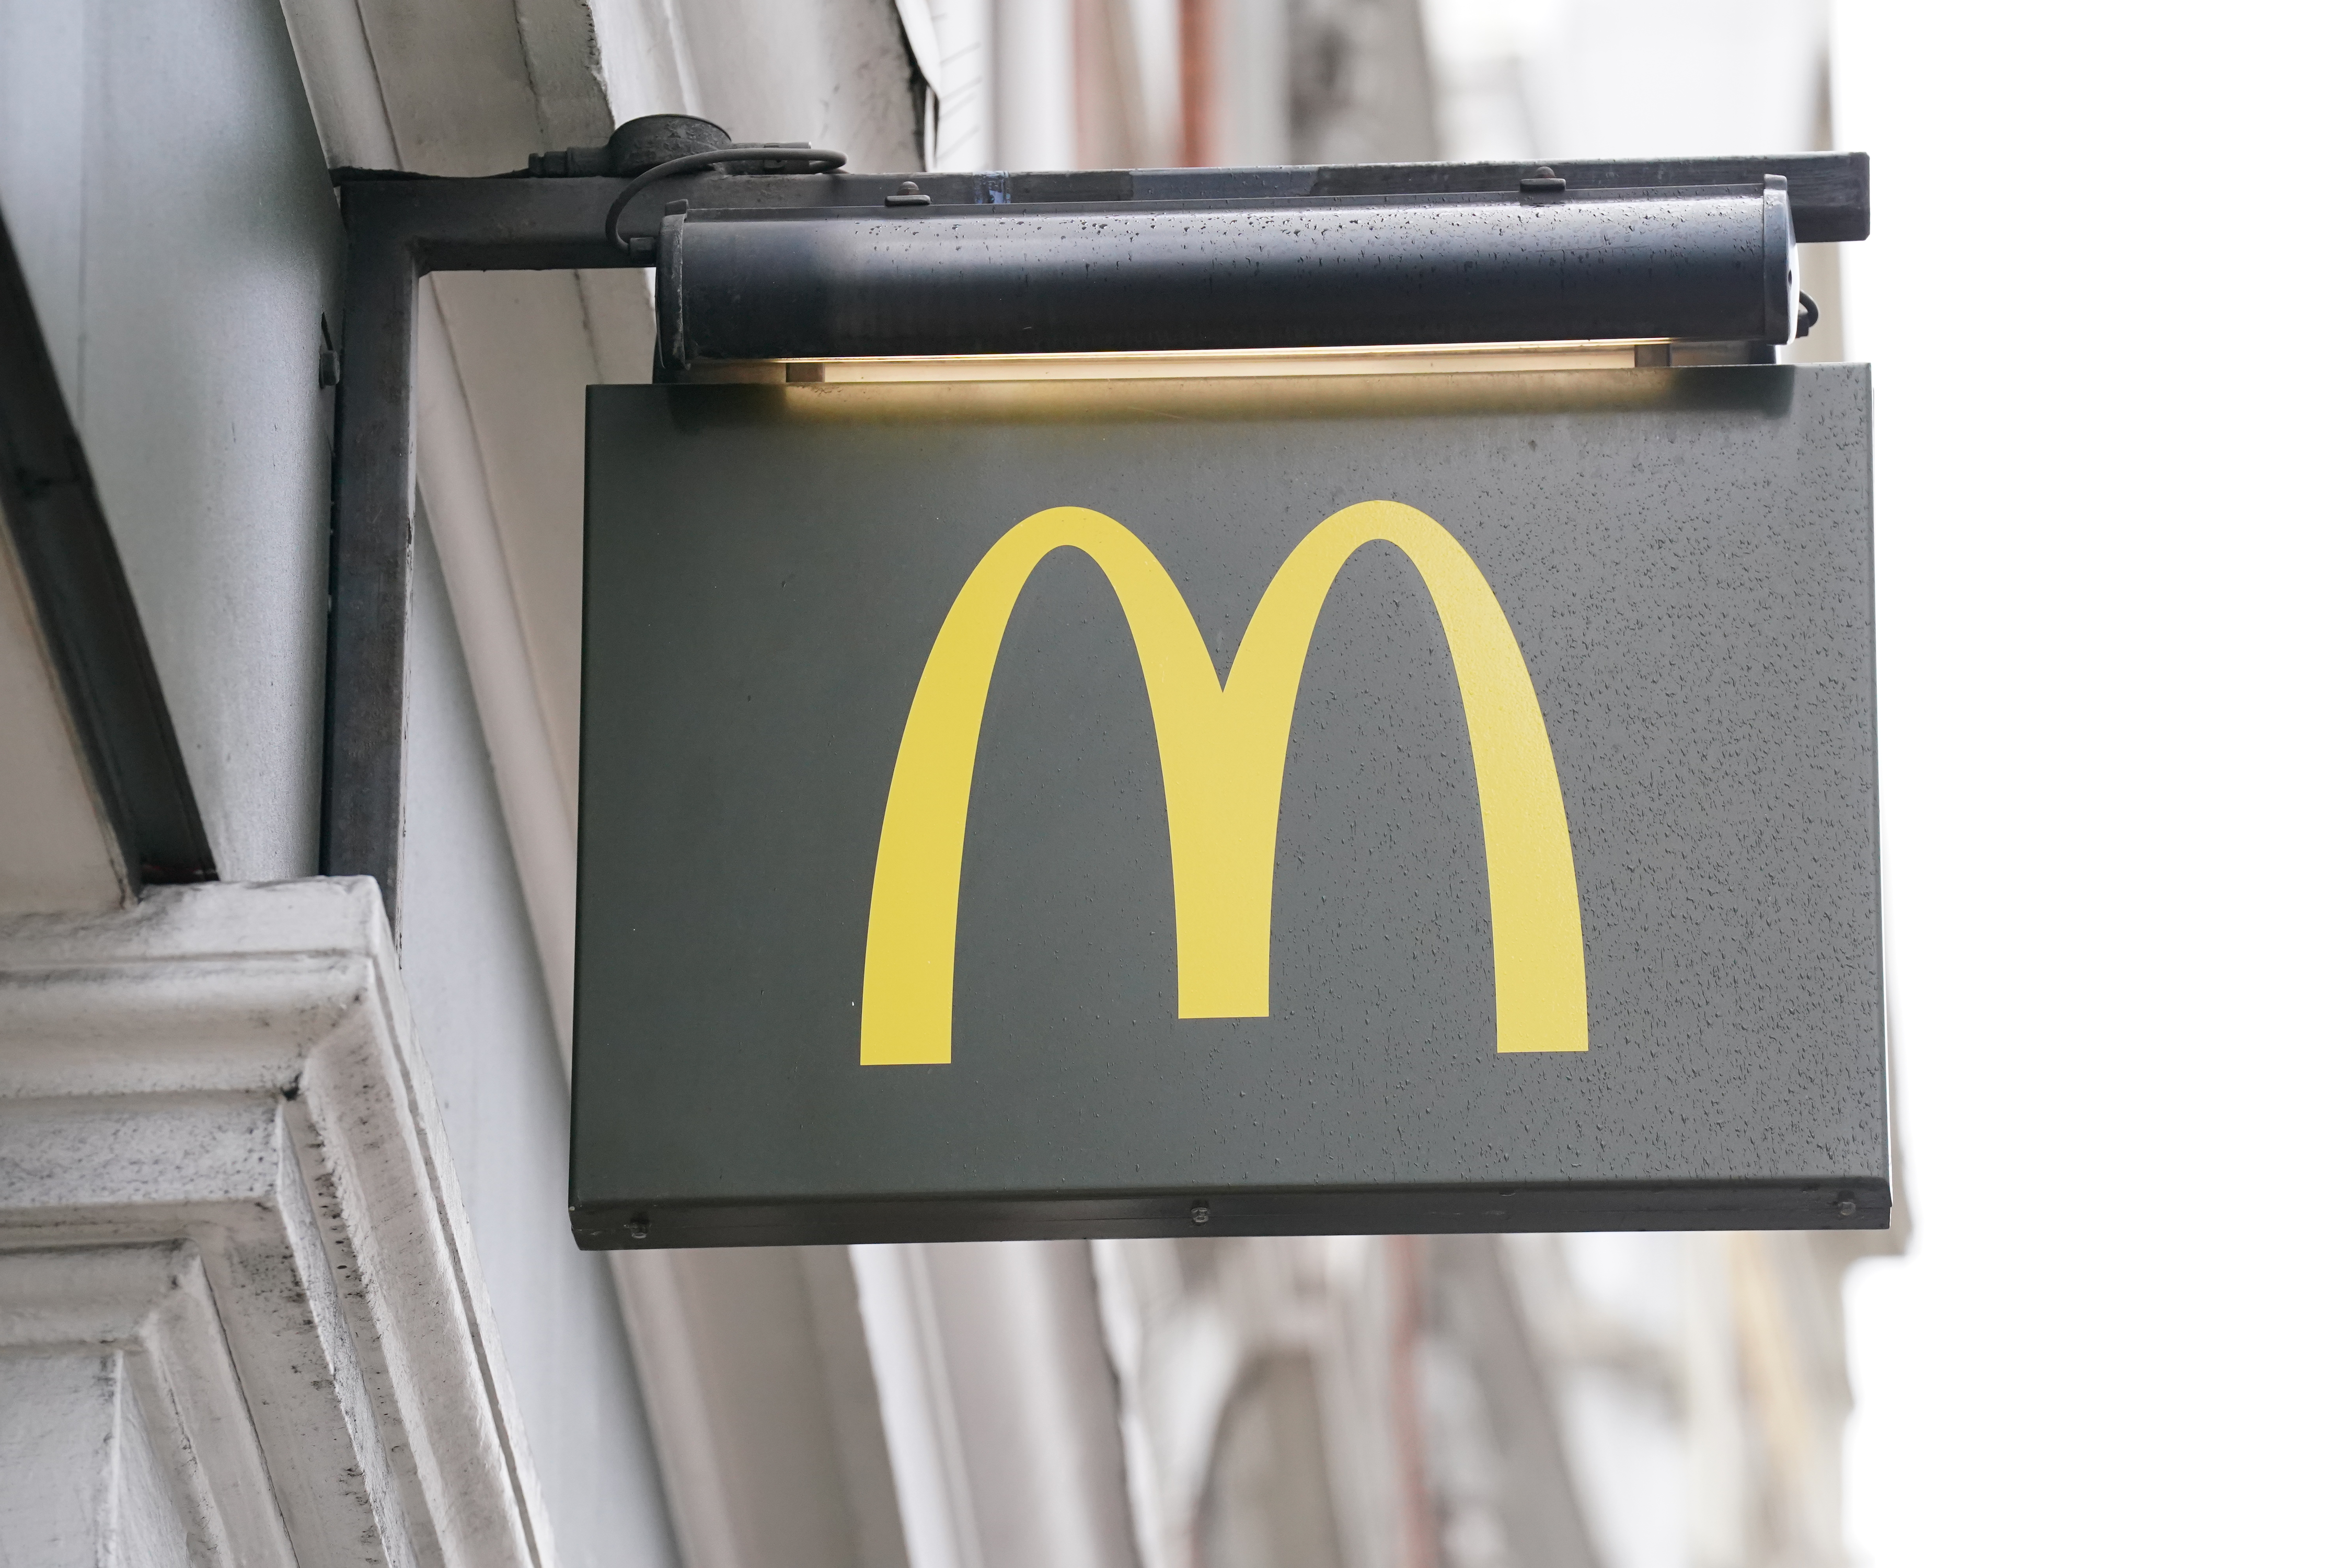 Changes to a couple of popular fast food restaurants